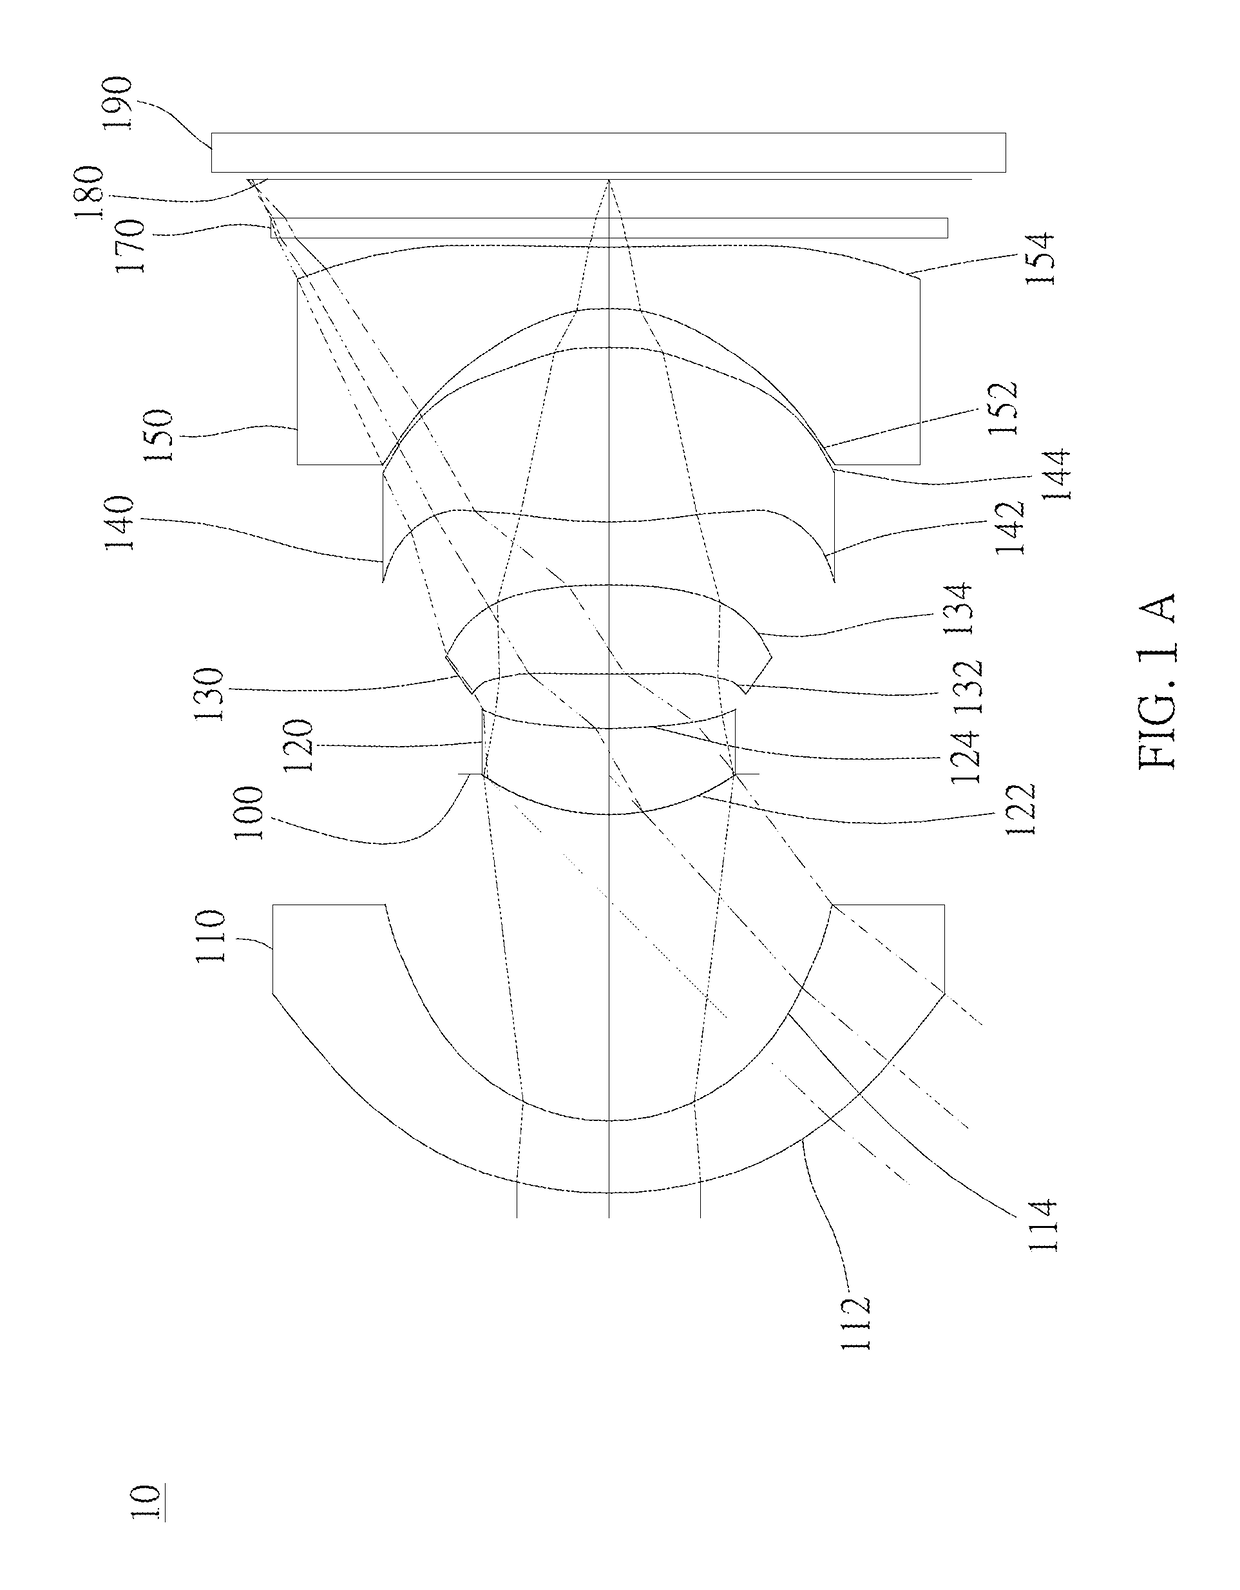 Optical image capturing system for electronic device